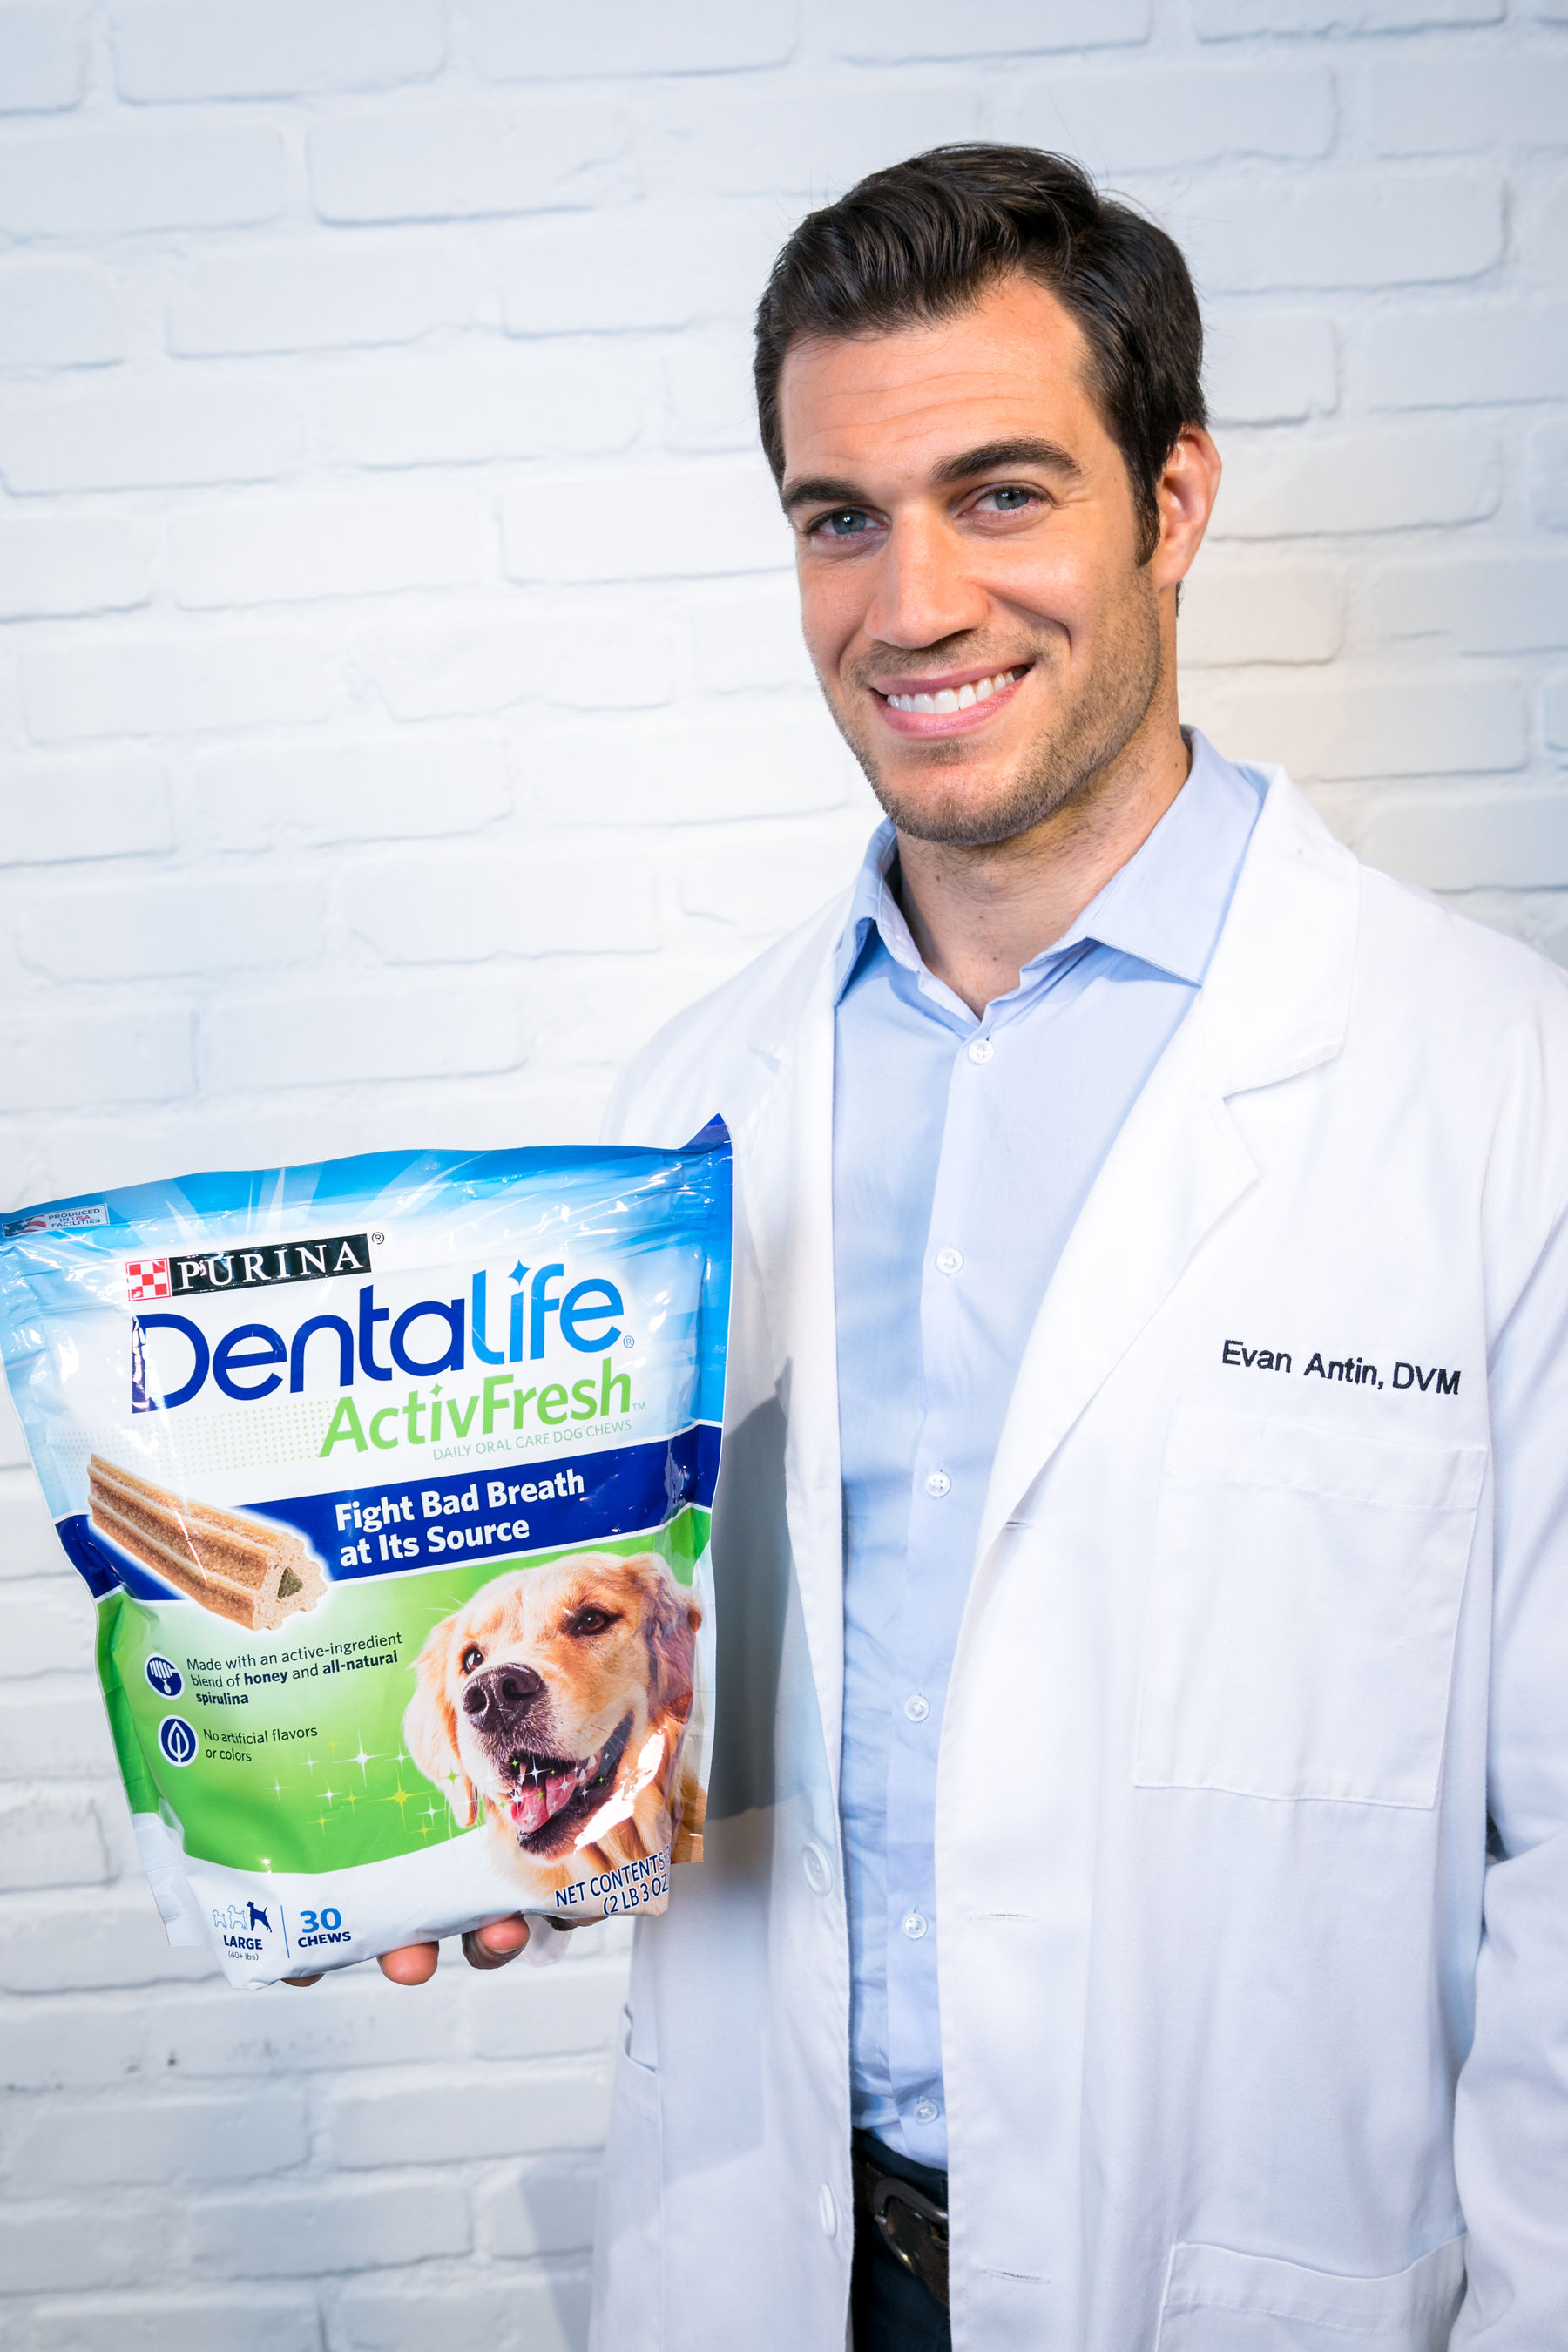 To introduce new Purina DentaLife ActivFresh, the brand partnered with well-known veterinarian and host of Animal Planet’s “Evan Goes Wild,” Dr. Evan Antin to help dog owners keep their dog’s breath fresh and teeth healthy by practicing regular dental hygiene.